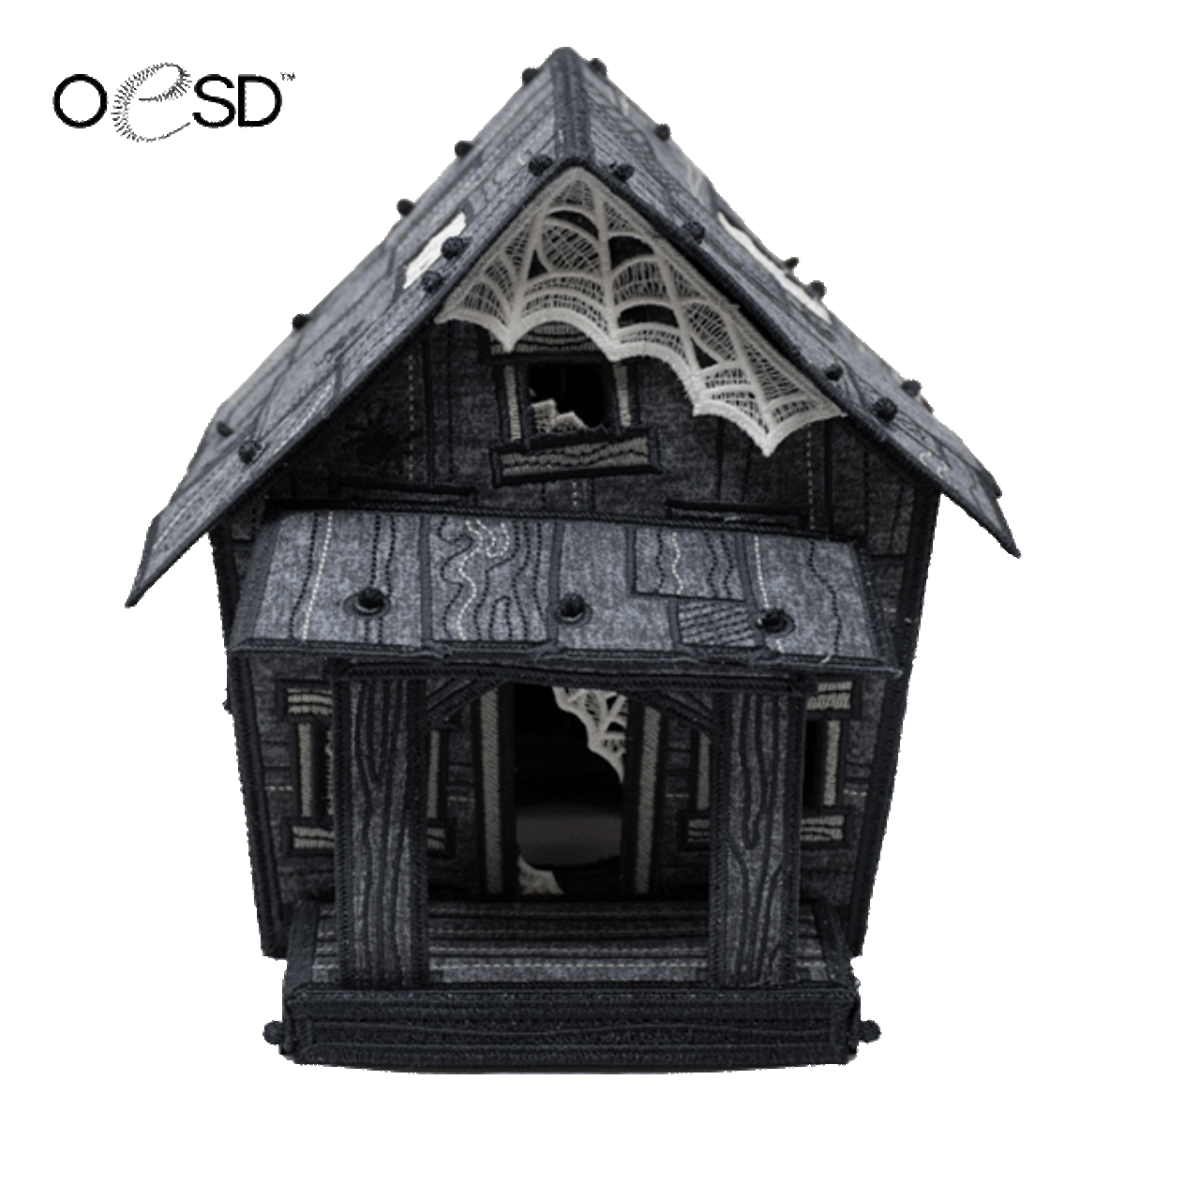 OESD Freestanding Spooky Shack Embroidery Design Collection,OESD Freestanding Spooky Shack Embroidery Design Collection,OESD Freestanding Spooky Shack Embroidery Design Collection,OESD Freestanding Spooky Shack Embroidery Design Collection